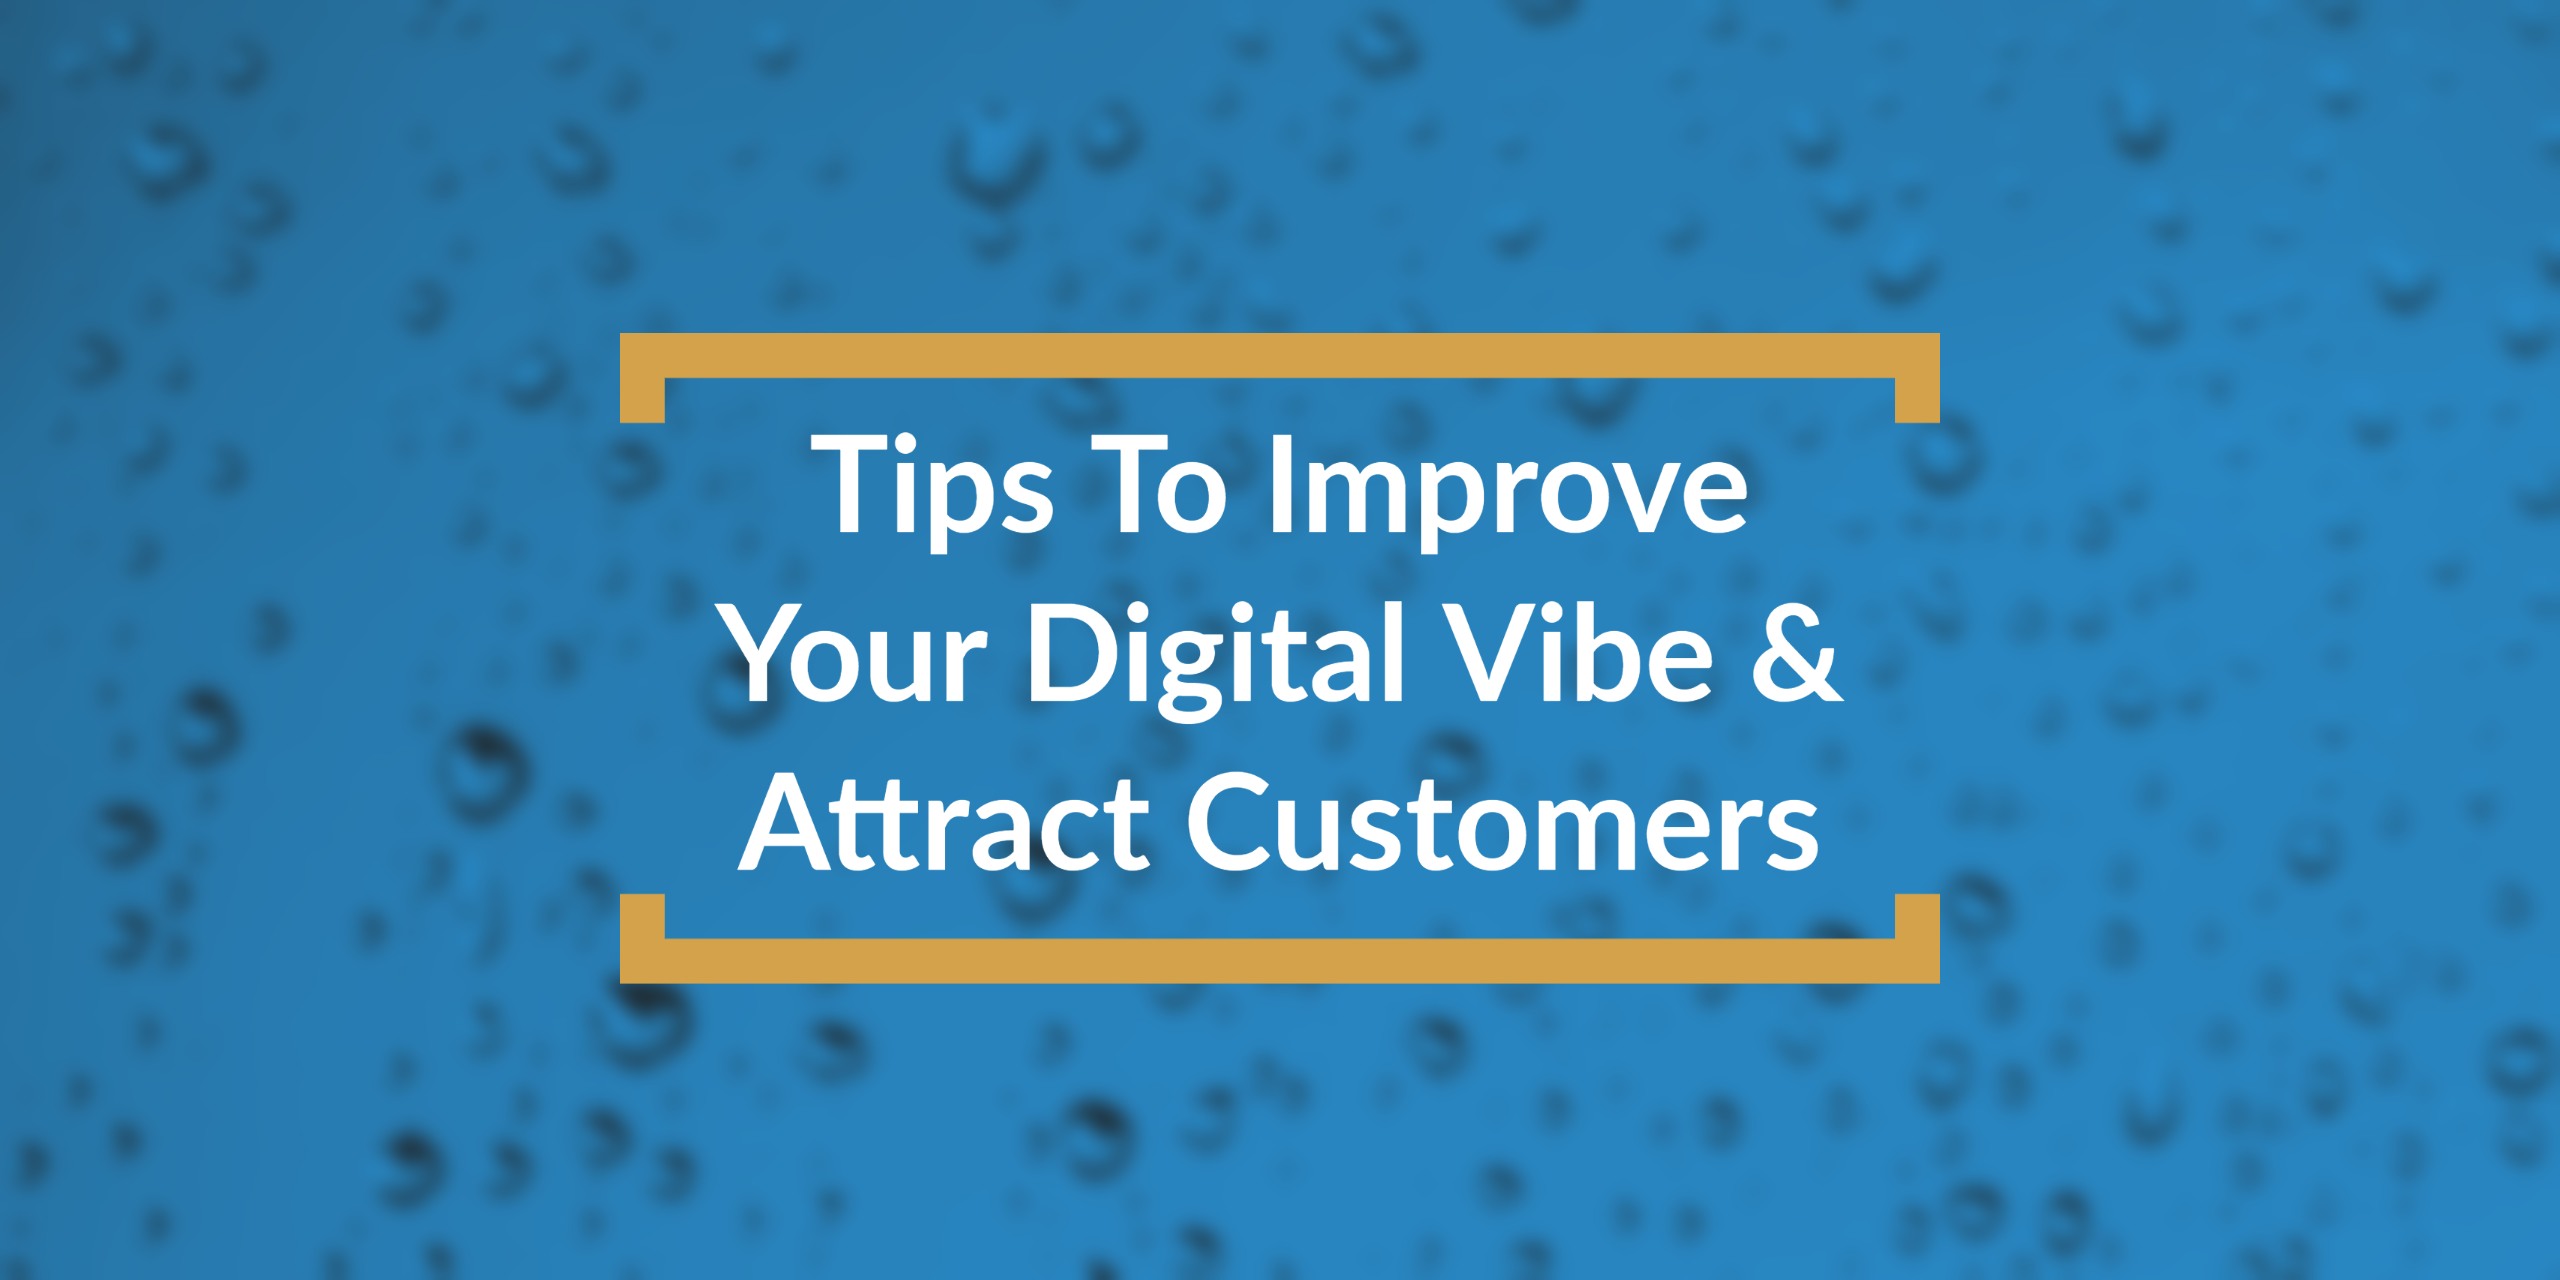 Improve Your Digital Vibe to Attract Customers - Title Box